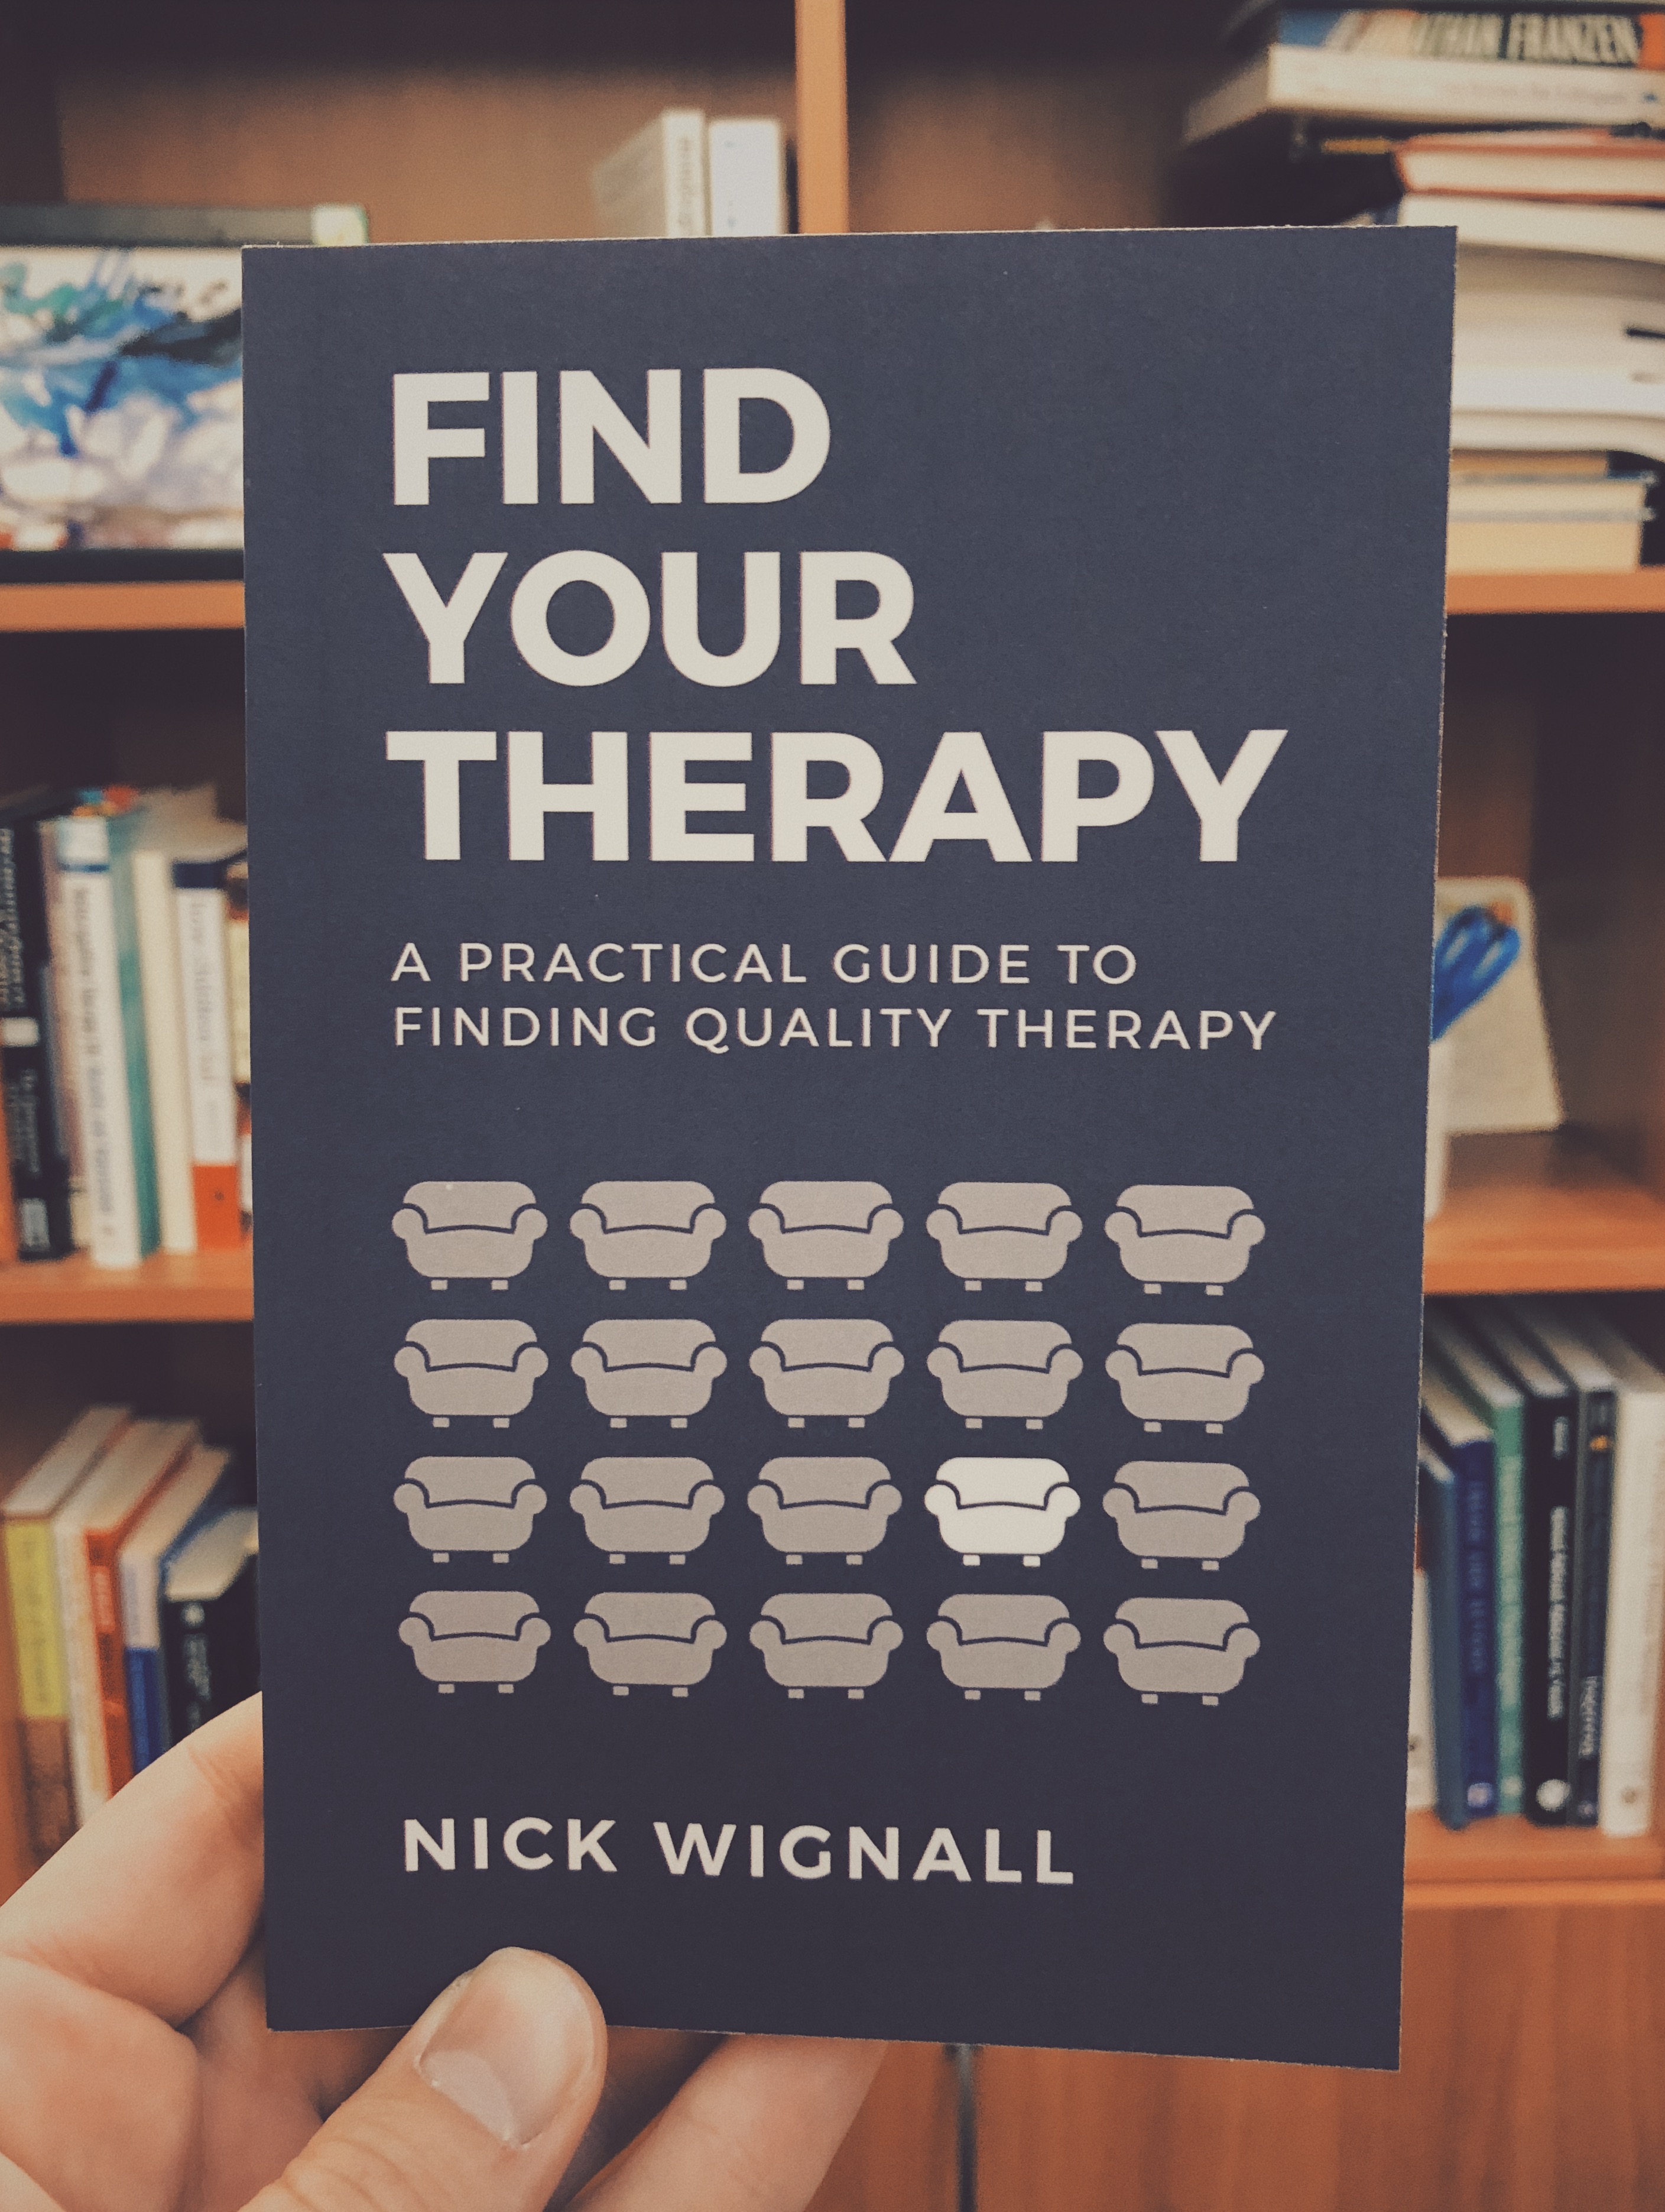 “Find Your Therapy” Book Cover